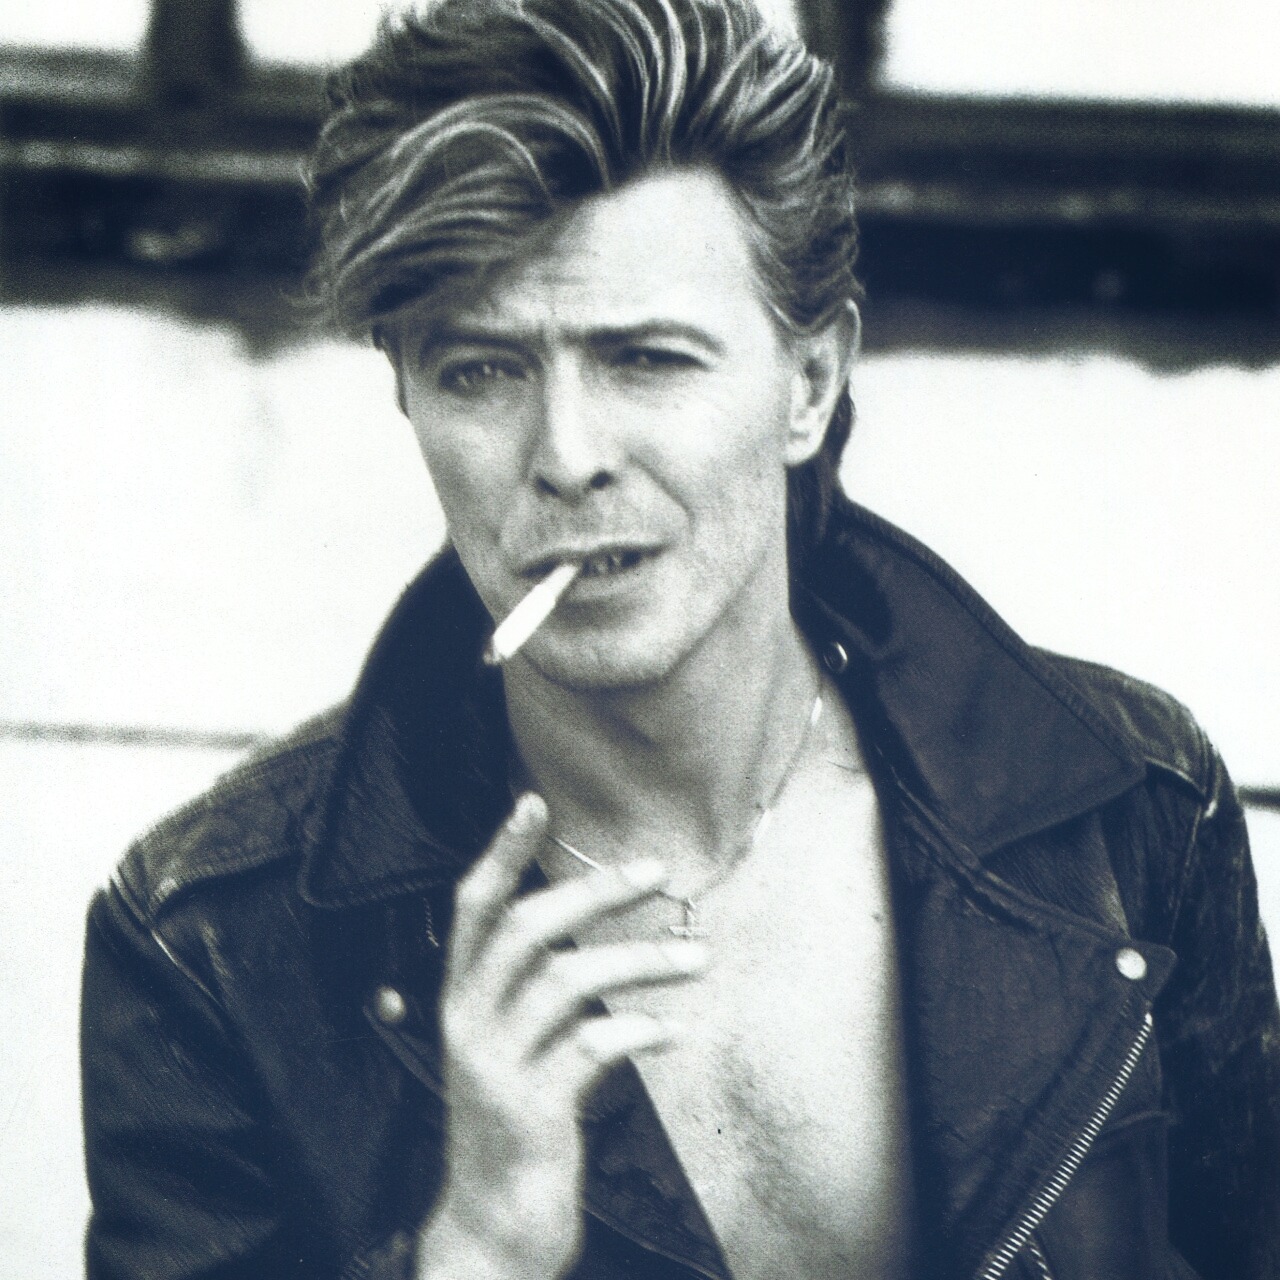 Dreams Unwind Loves A State Of Mind Rest In Peace David Bowie January 8 1947 4886